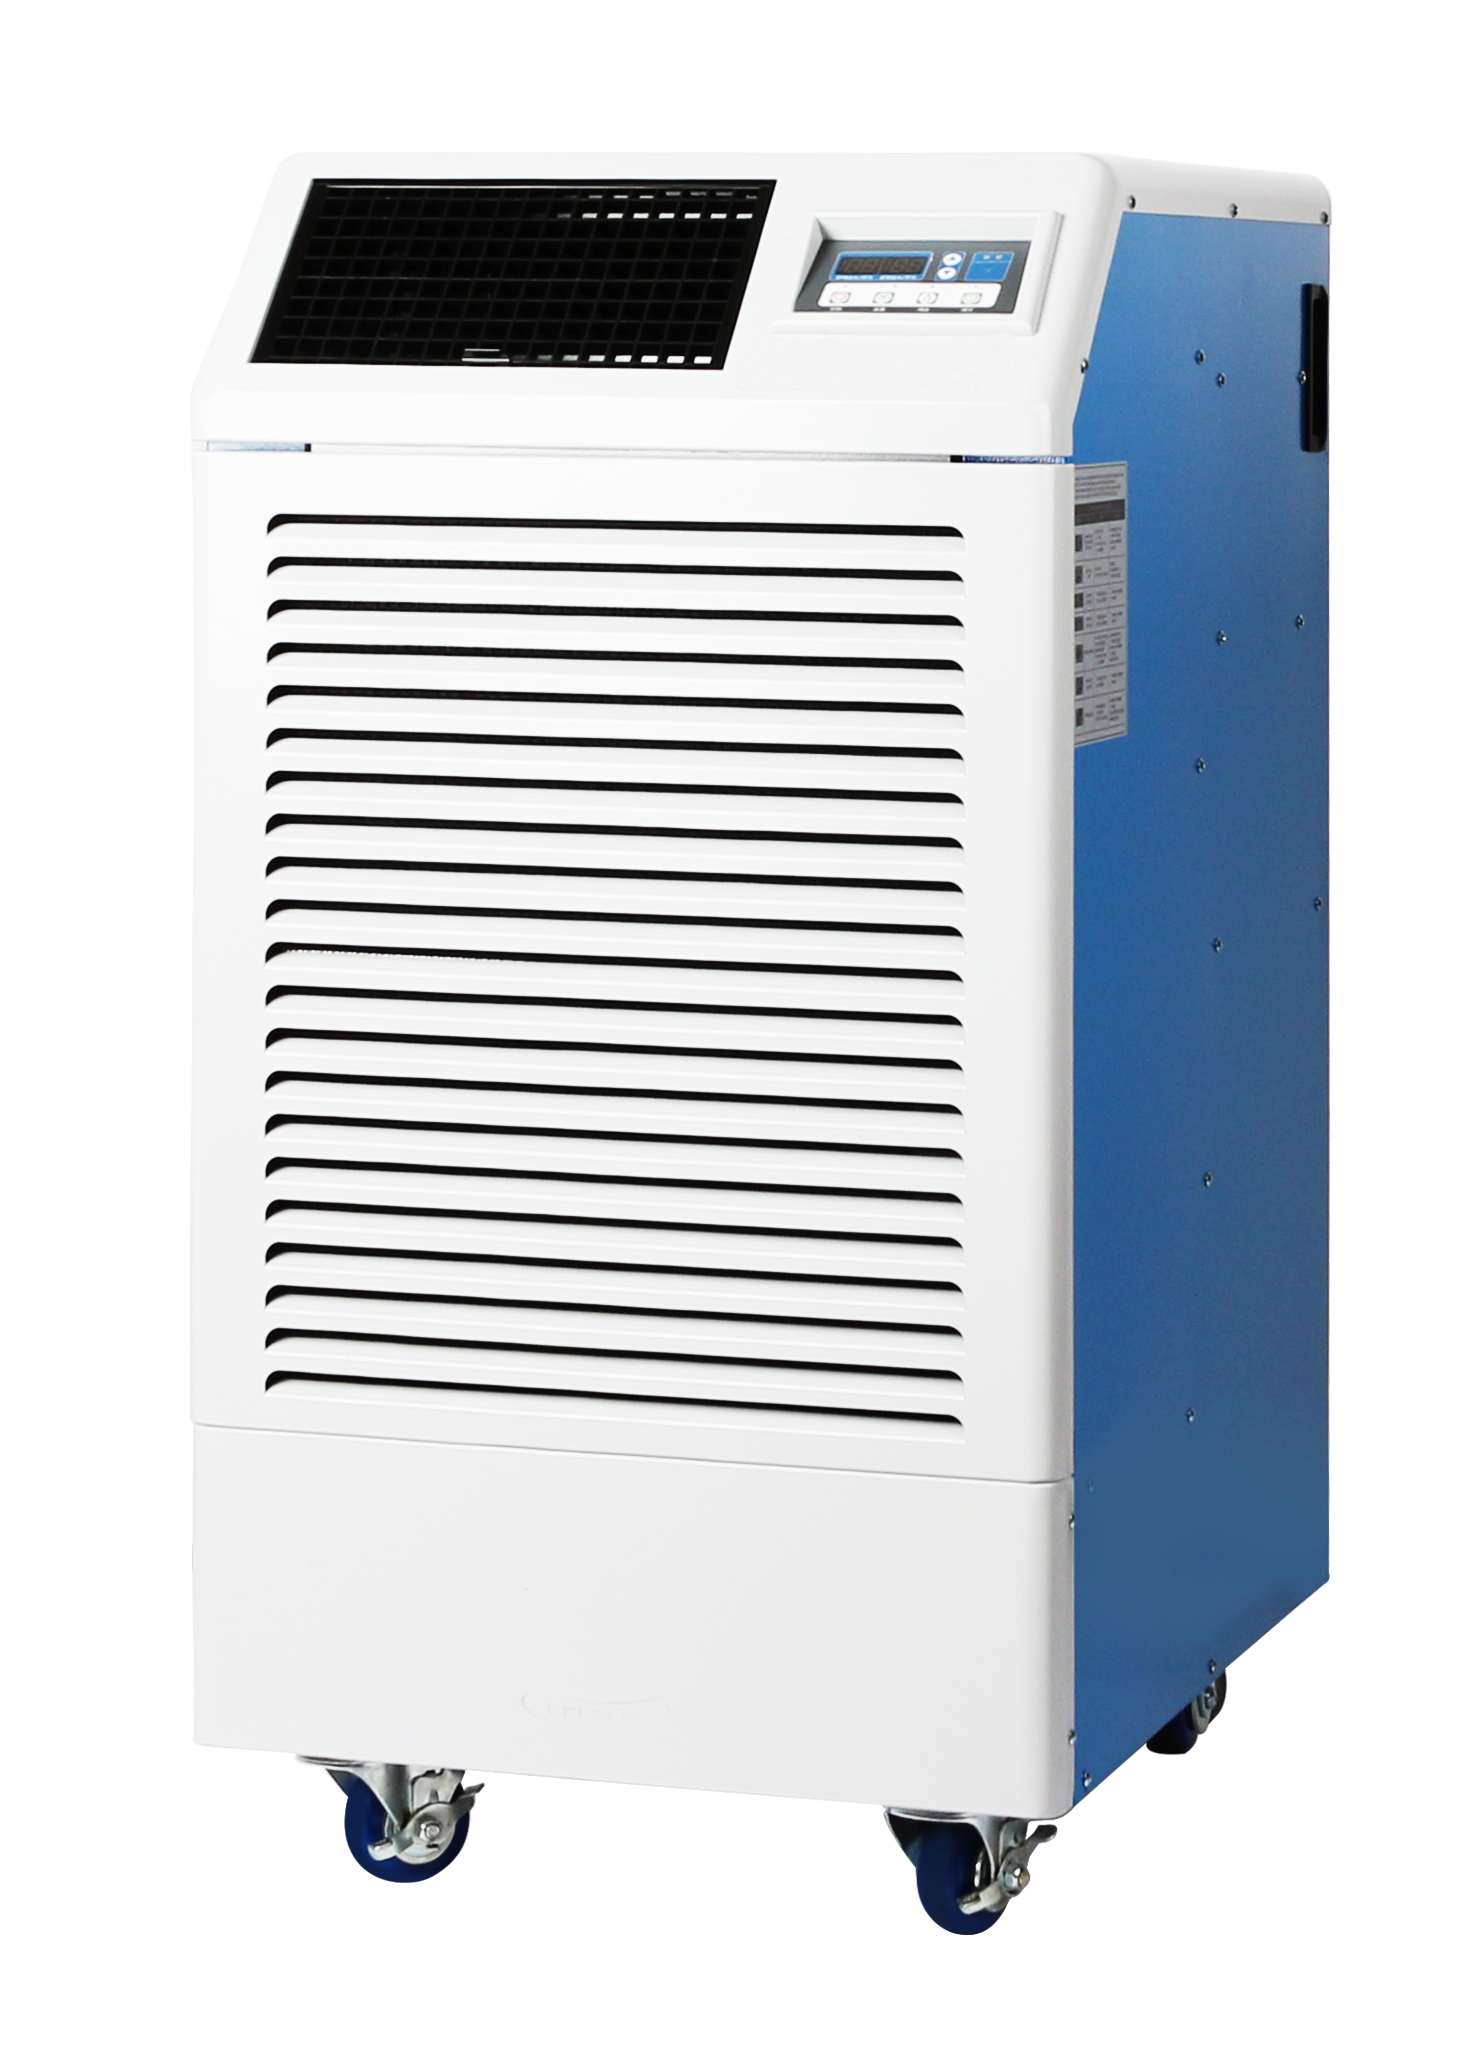 Industrial Dehumidifier / Industrial Heating Cooling Ventilation Distribution Fans Warehouse Australia / Fanmaster